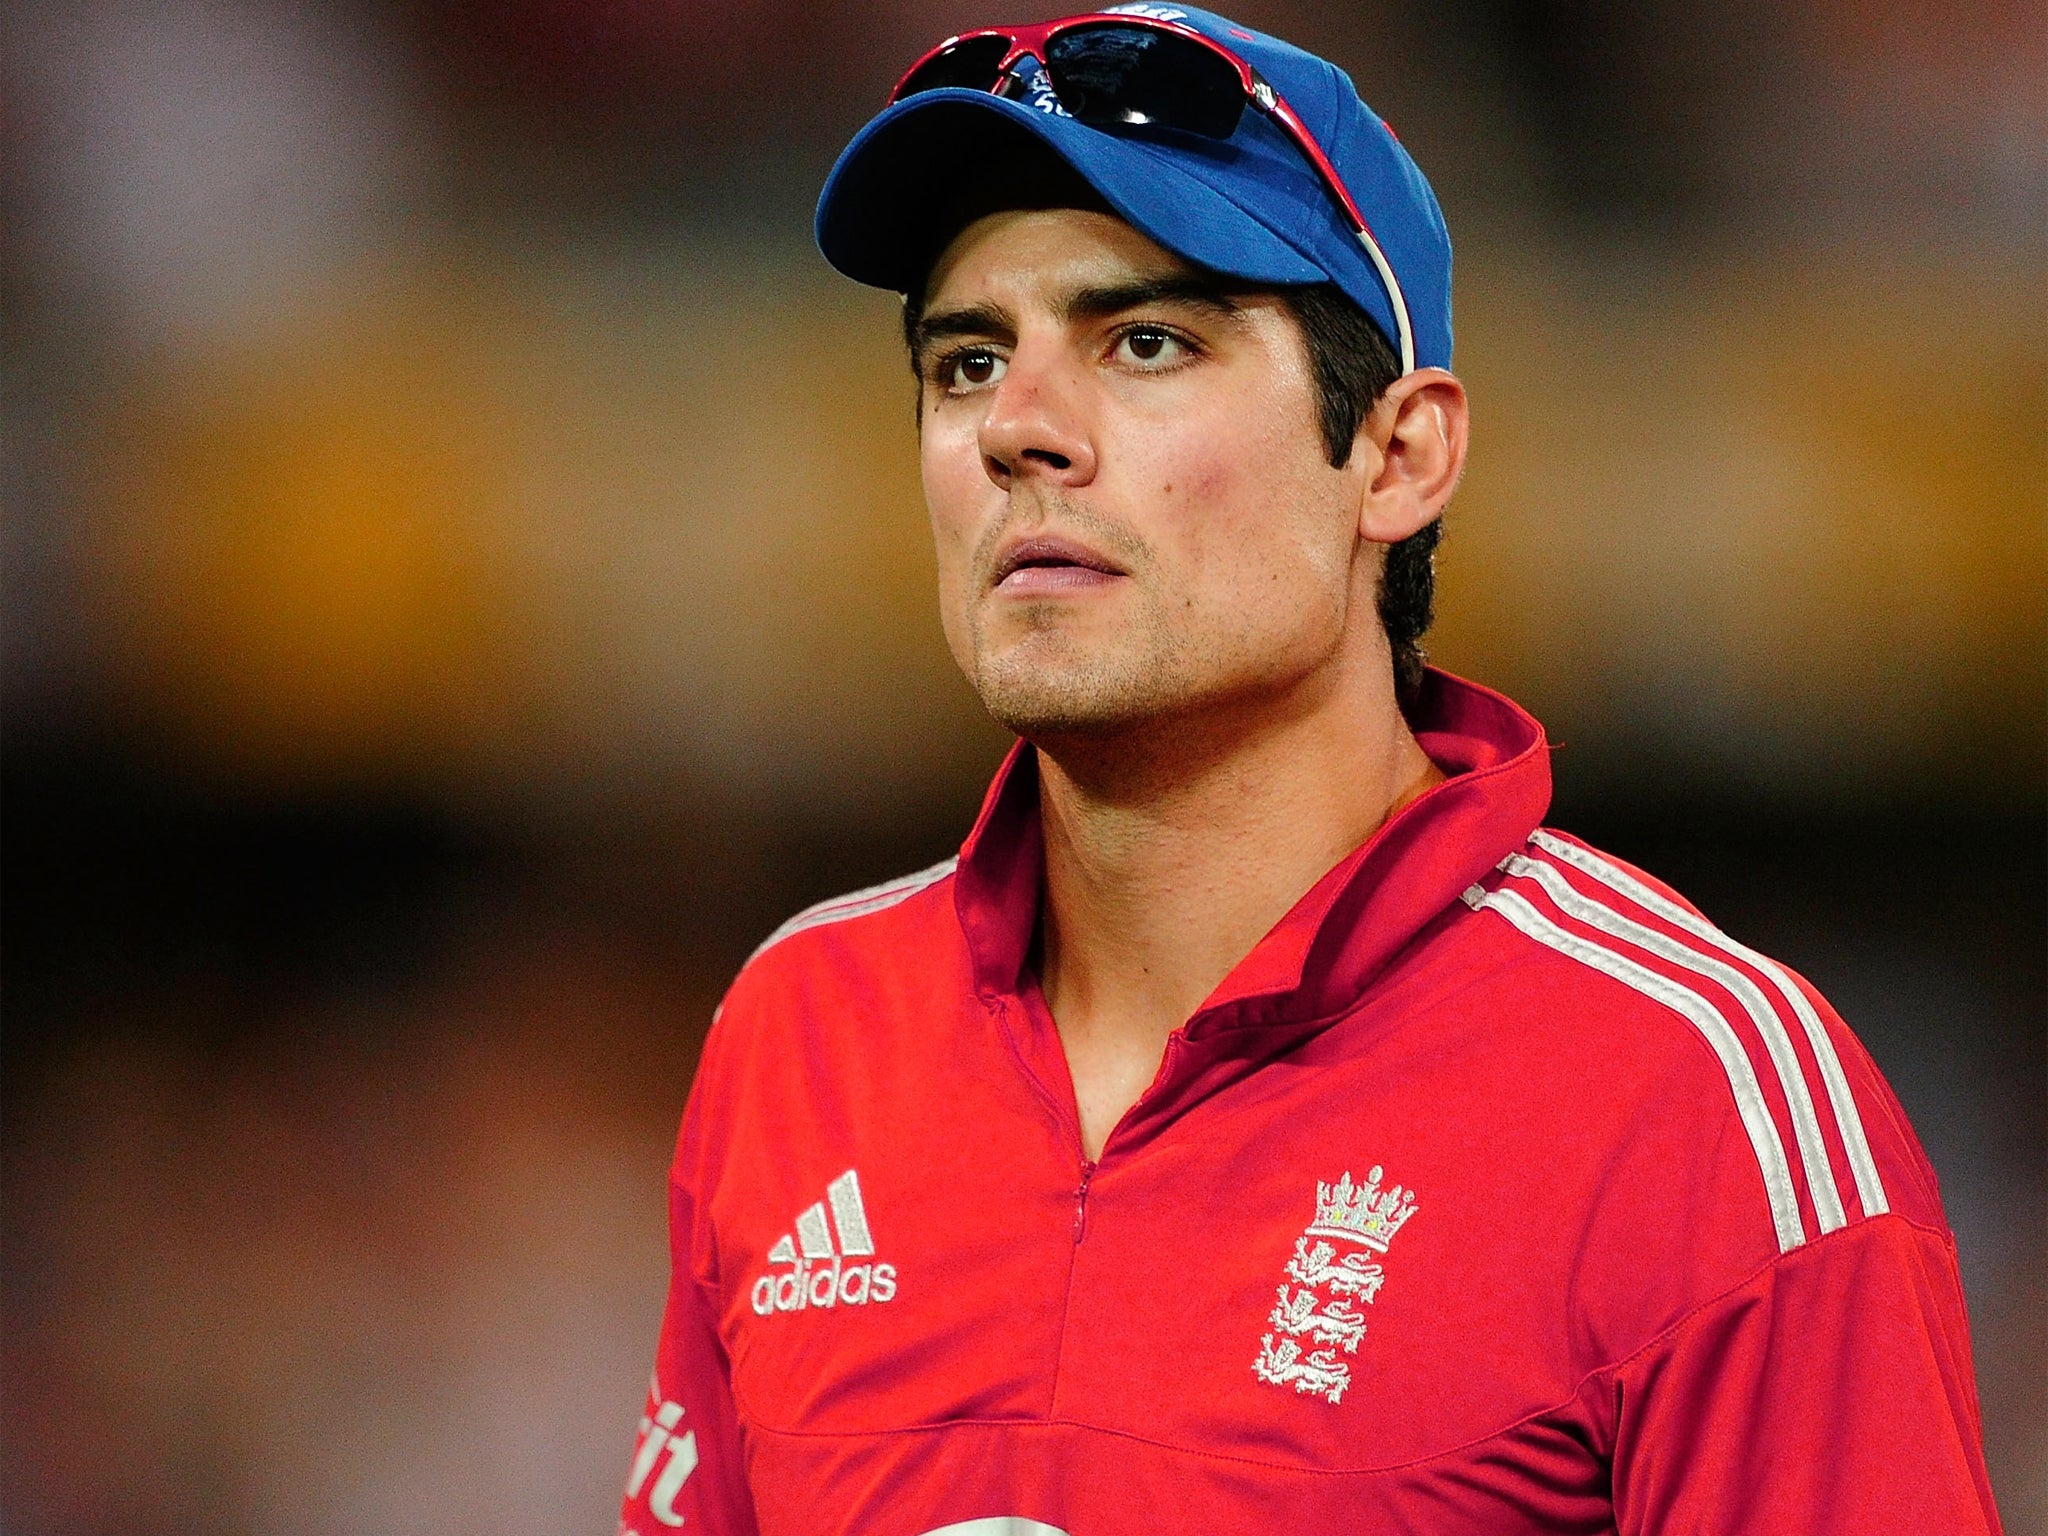 Alastair Cook will now fly home before the T20 series